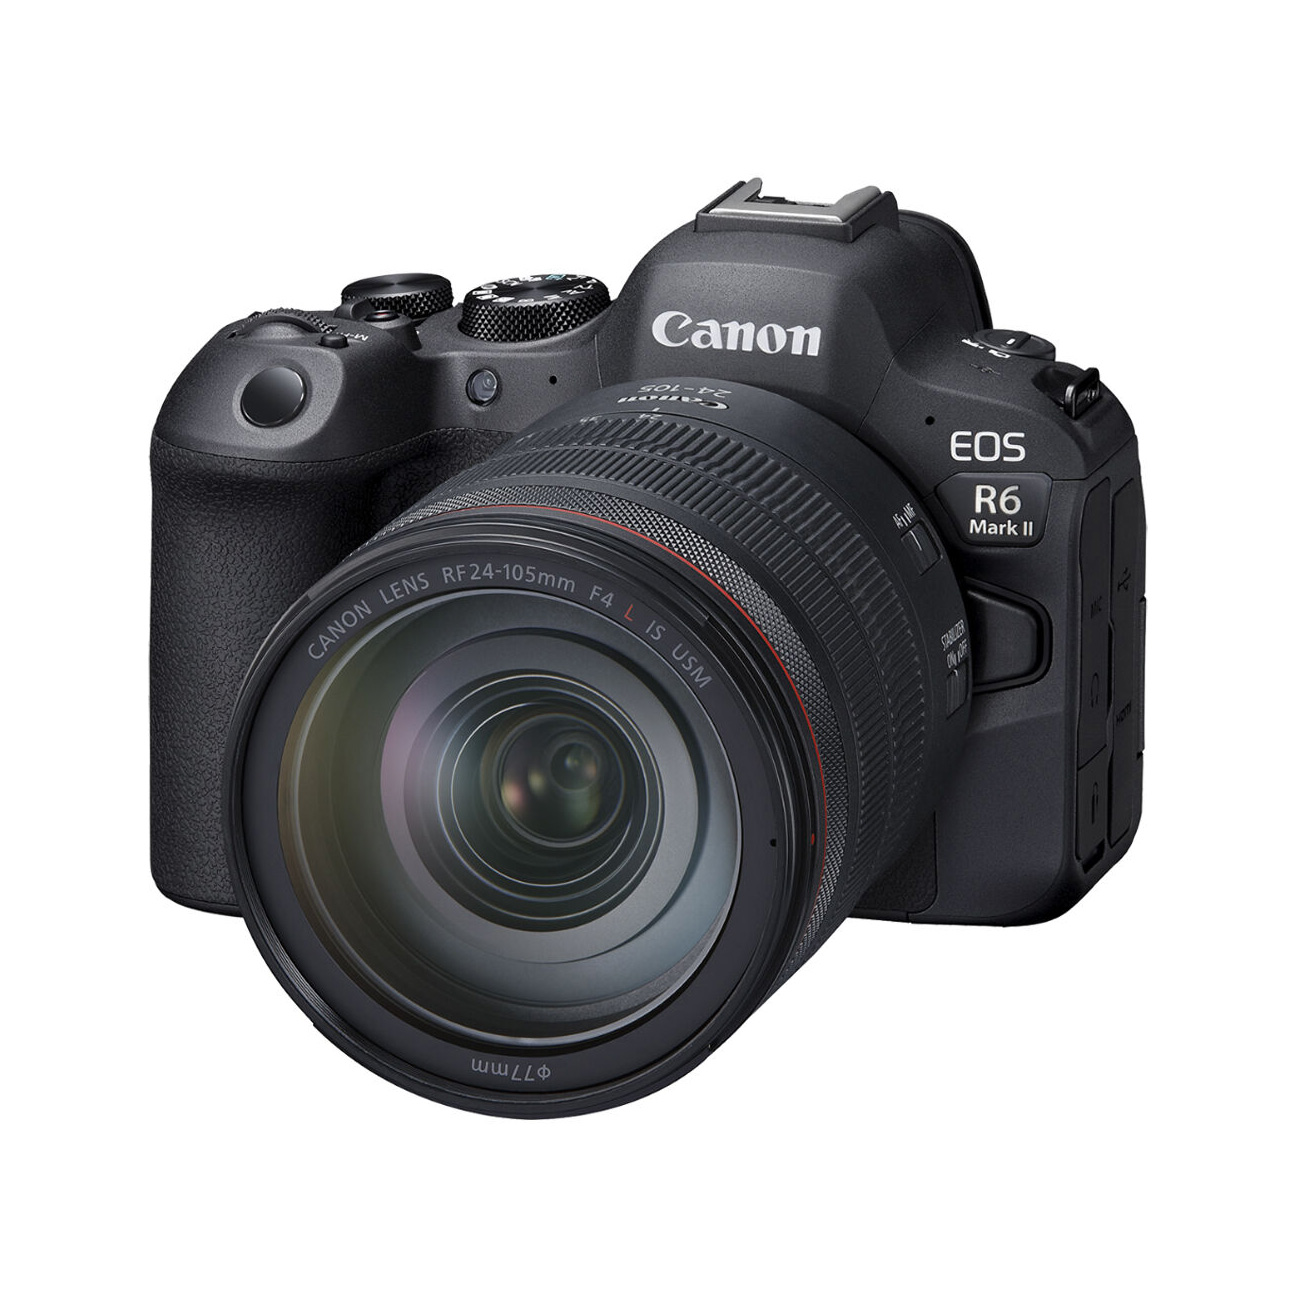 Armoedig verkoper geur Canon EOS R6 Mark II Mirrorless Camera with 24-105mm f/4 Lens - The Camera  Exchange